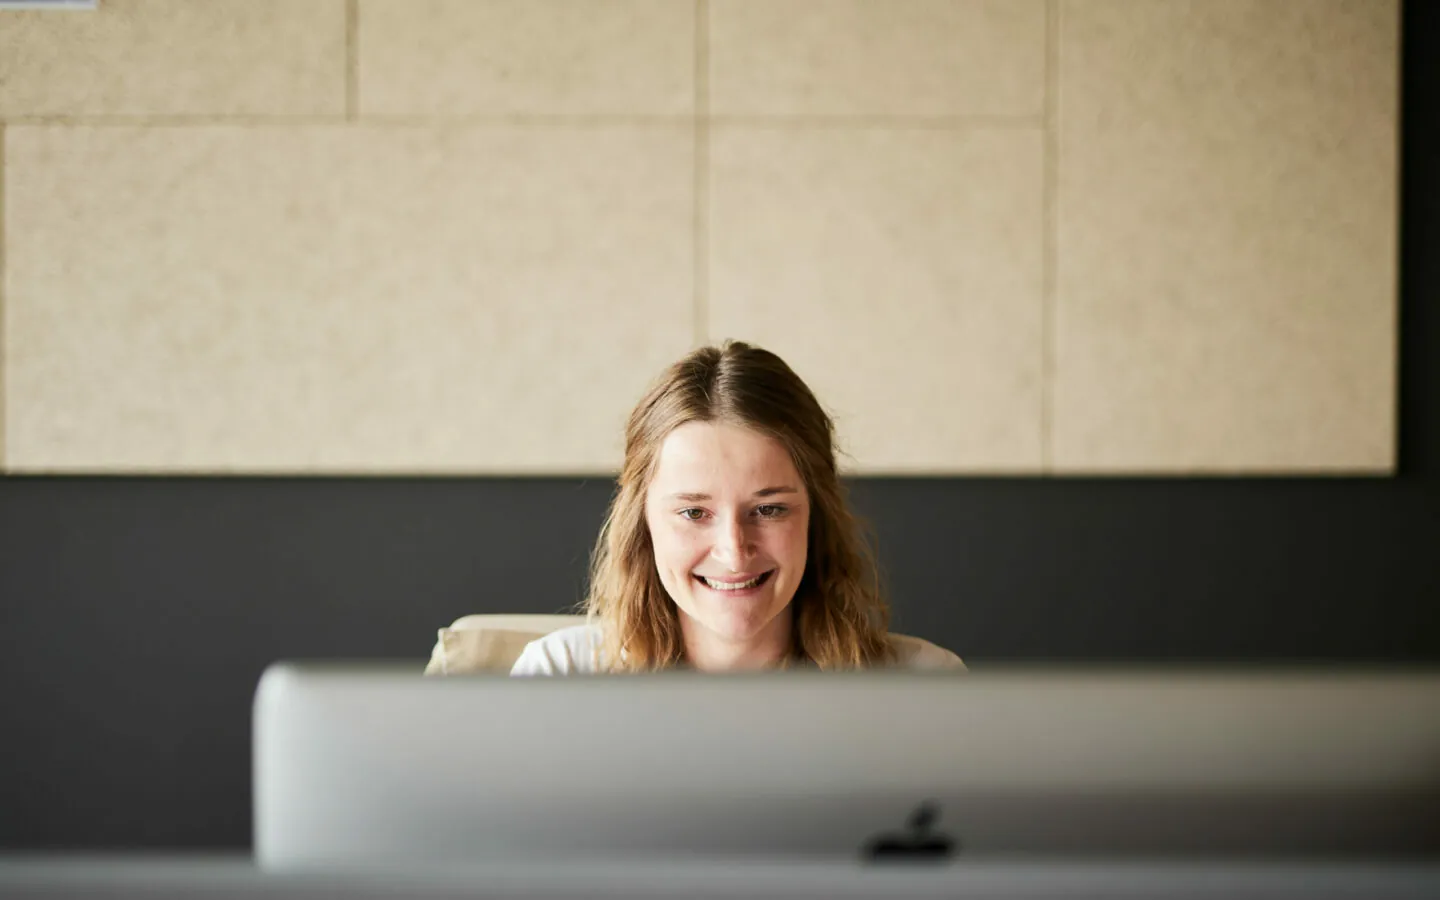 Photo of young smiling woman working at PC.